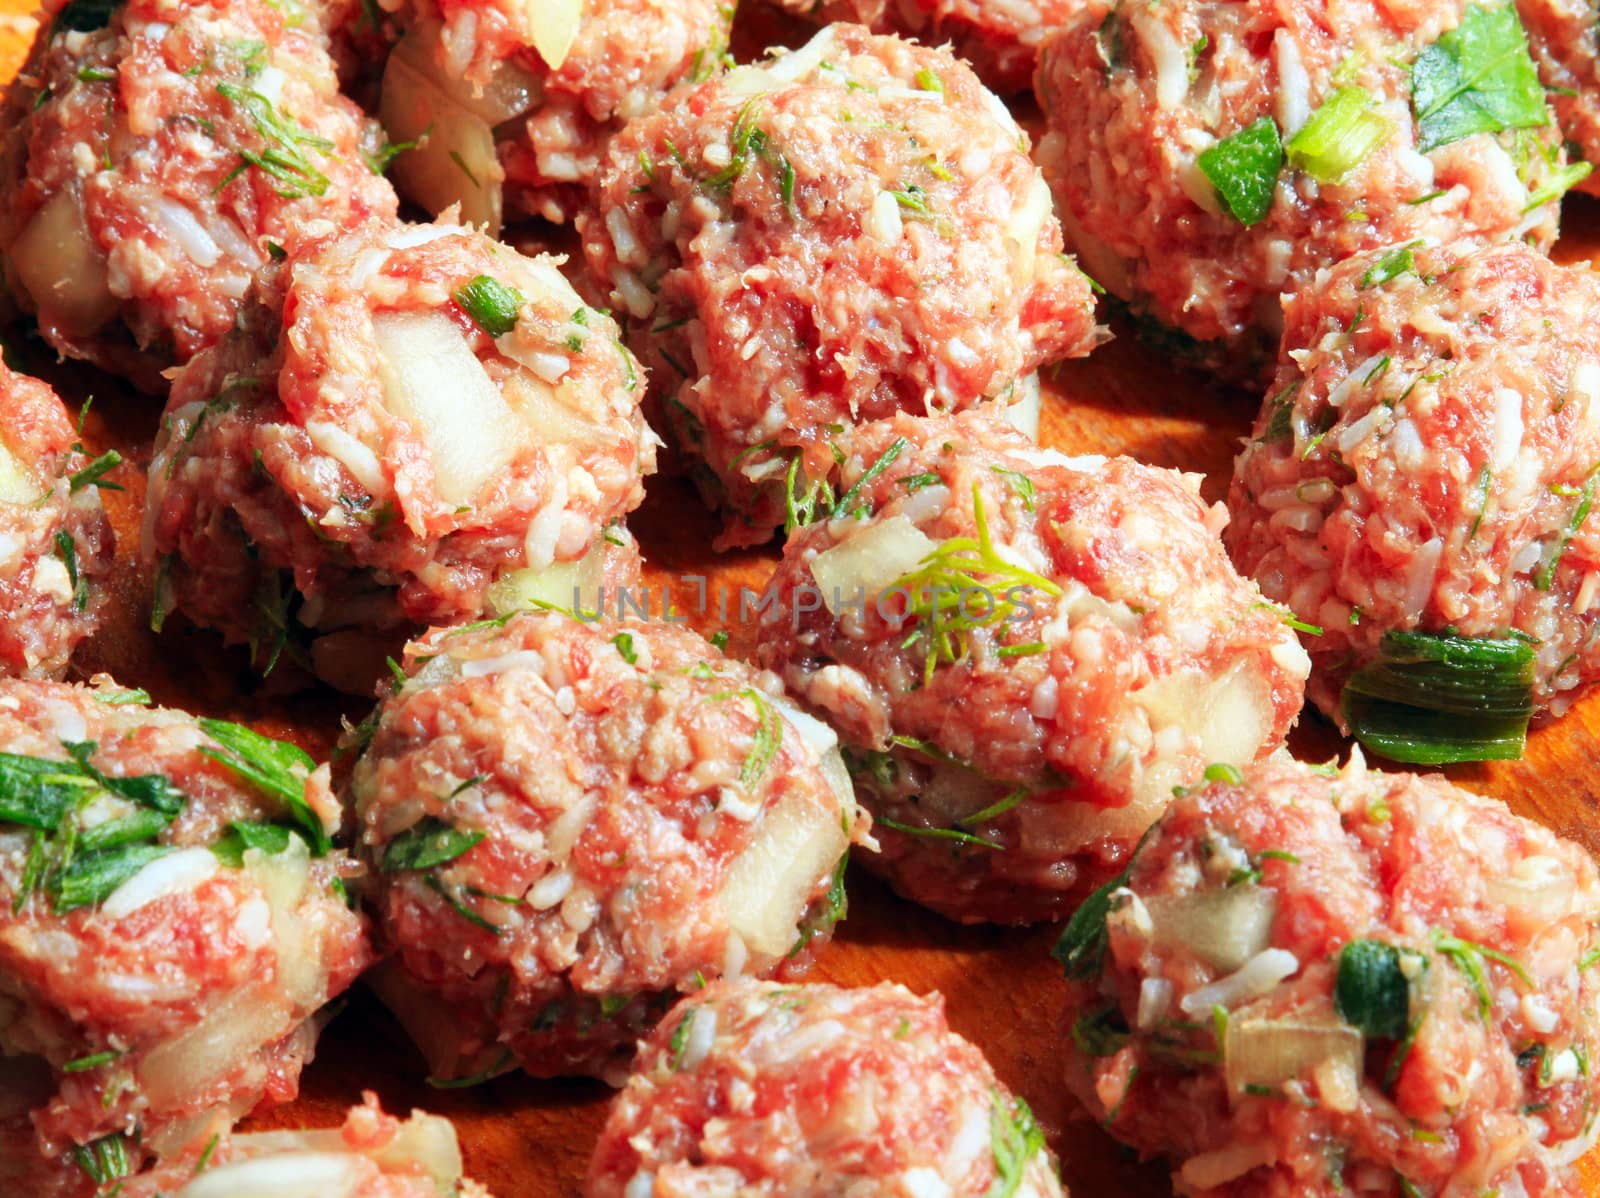 Raw meatballs on the chopping board by evp82